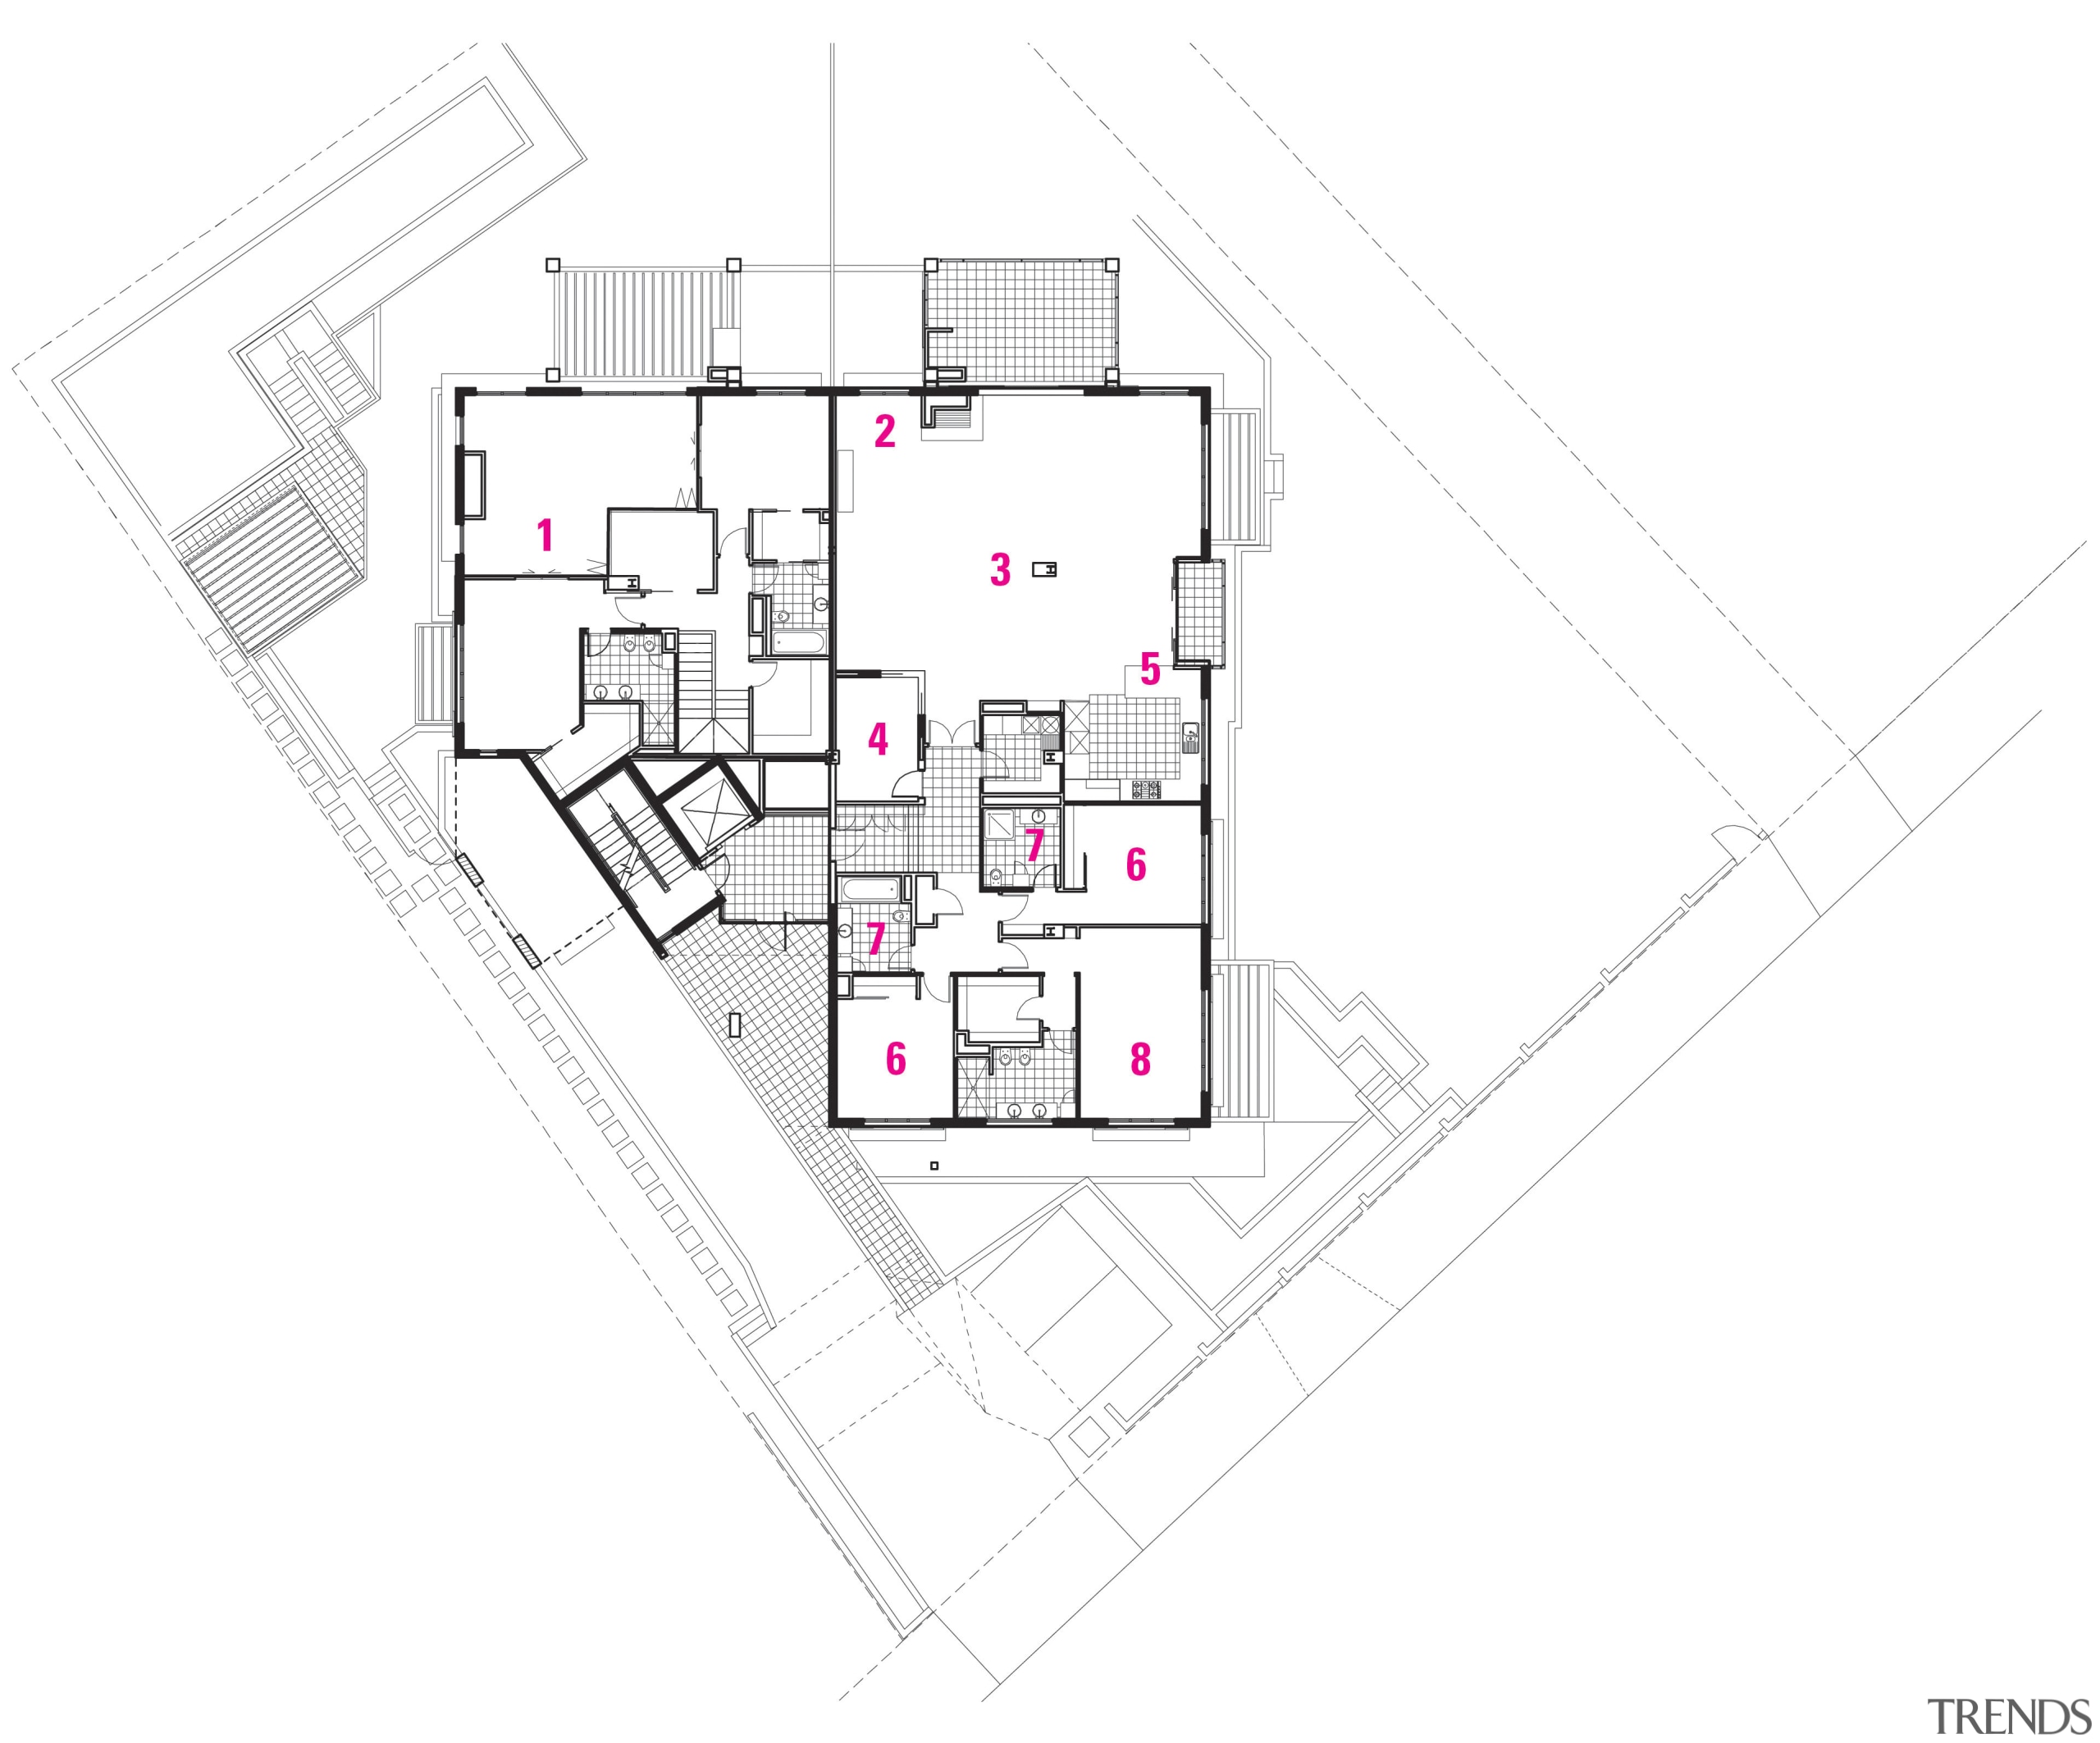 Plan of apartment layout. - Plan of apartment angle, architecture, area, design, diagram, drawing, floor plan, line, plan, product design, schematic, structure, white